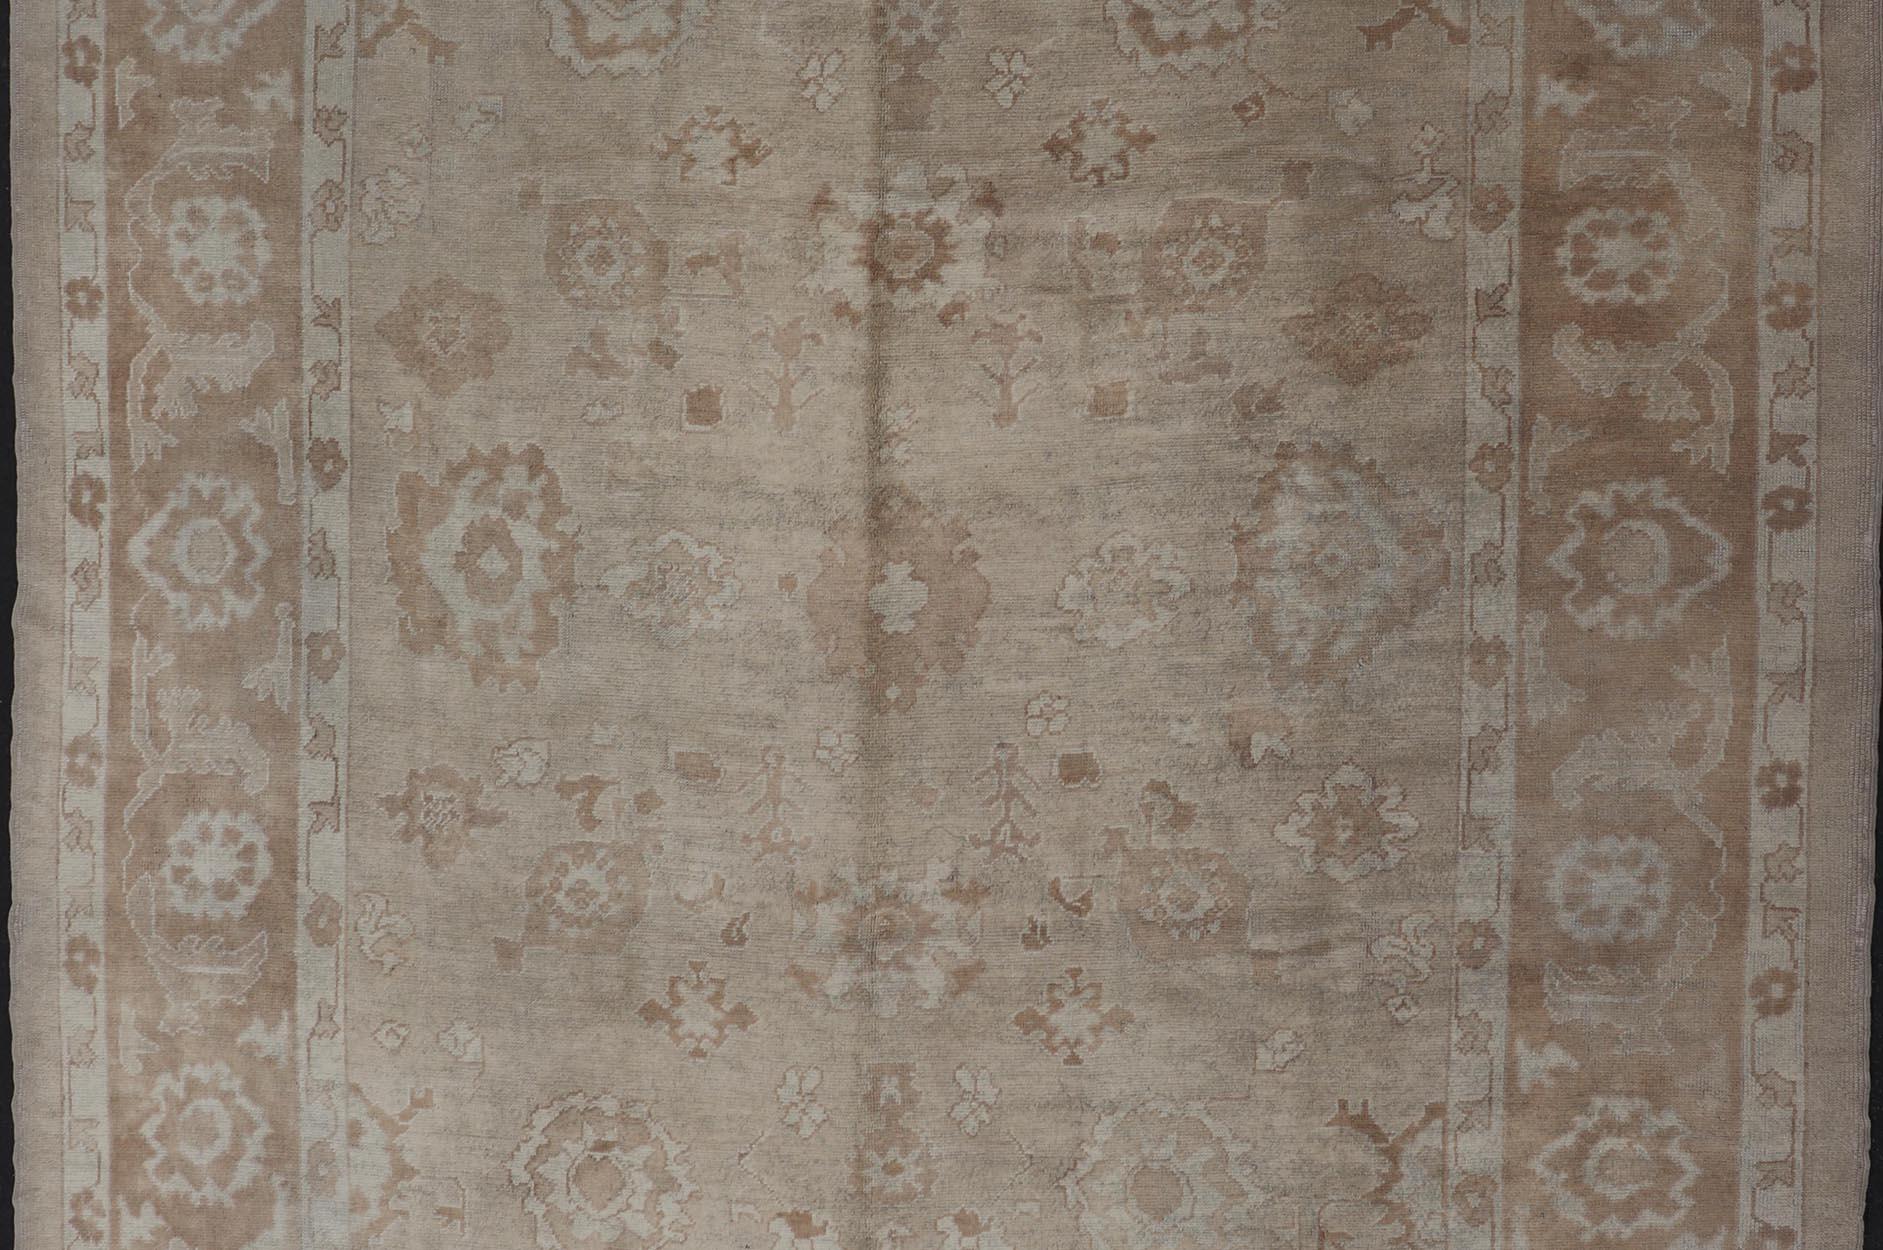 Hand-Knotted Neutral Colors Vintage Angora Oushak Turkish Rug in Light Brown and Cream